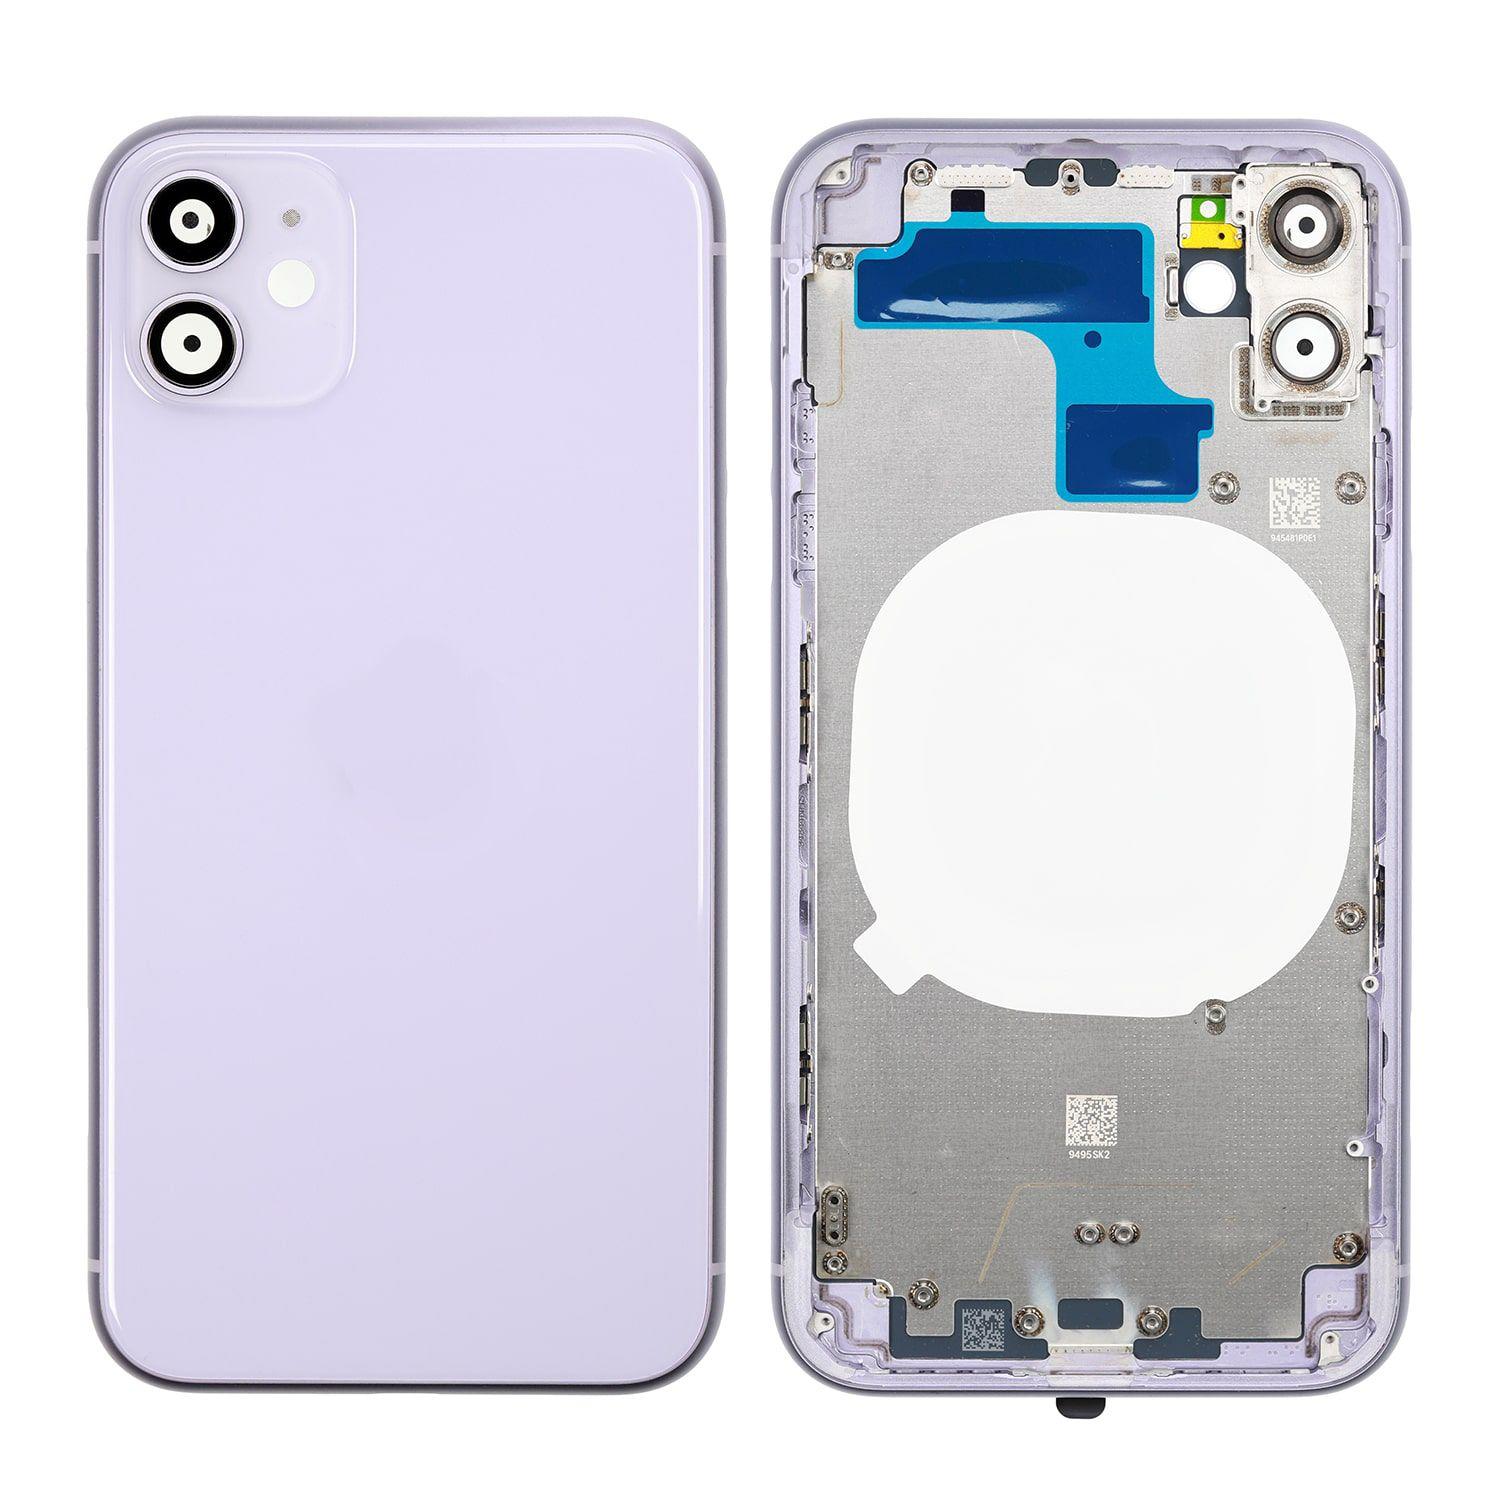 Body for iPhone 11 + back cover purple